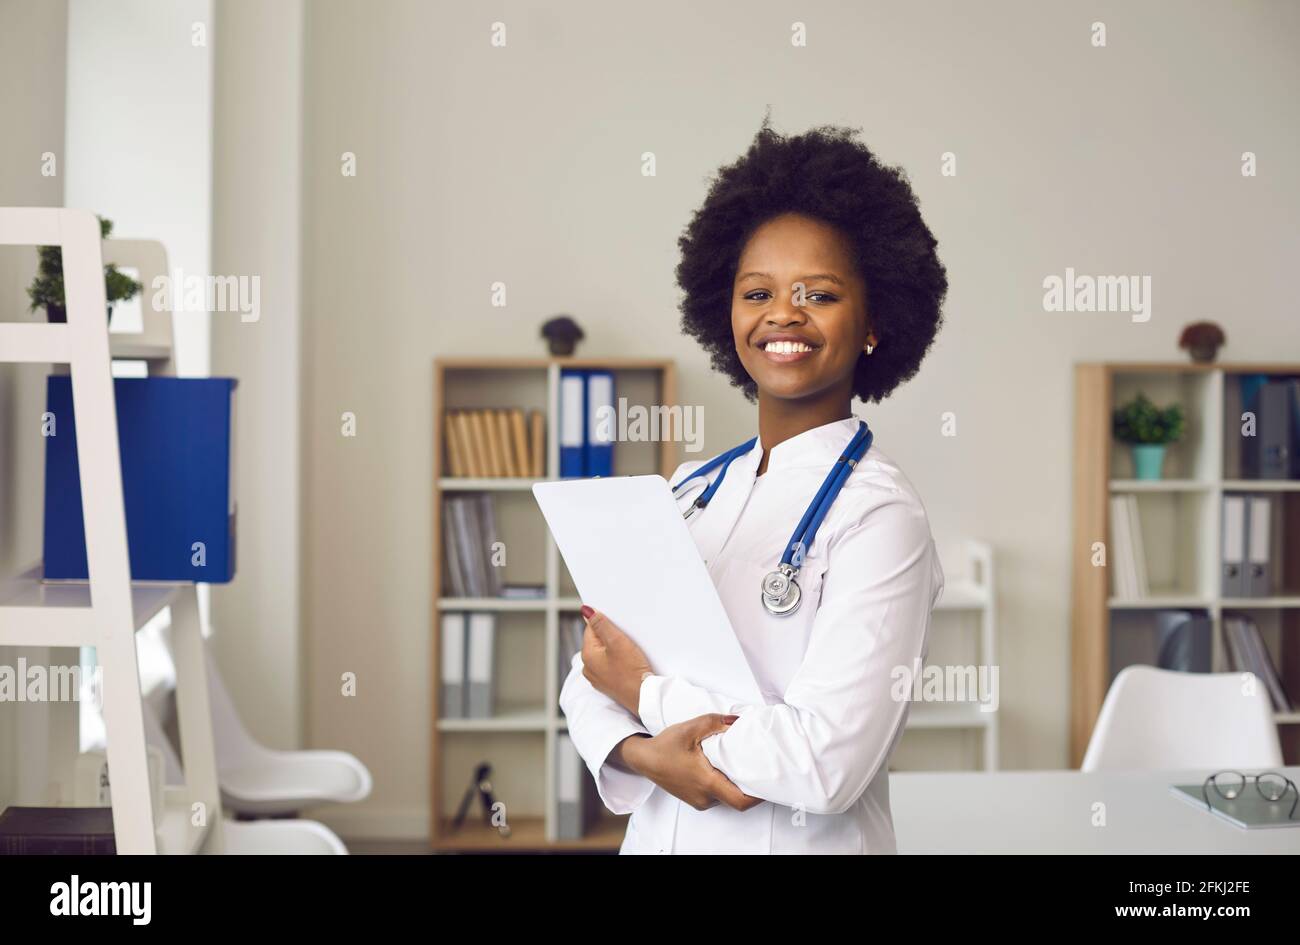 Smiling young african american doctor in uniform with paper in hand portrait Stock Photo